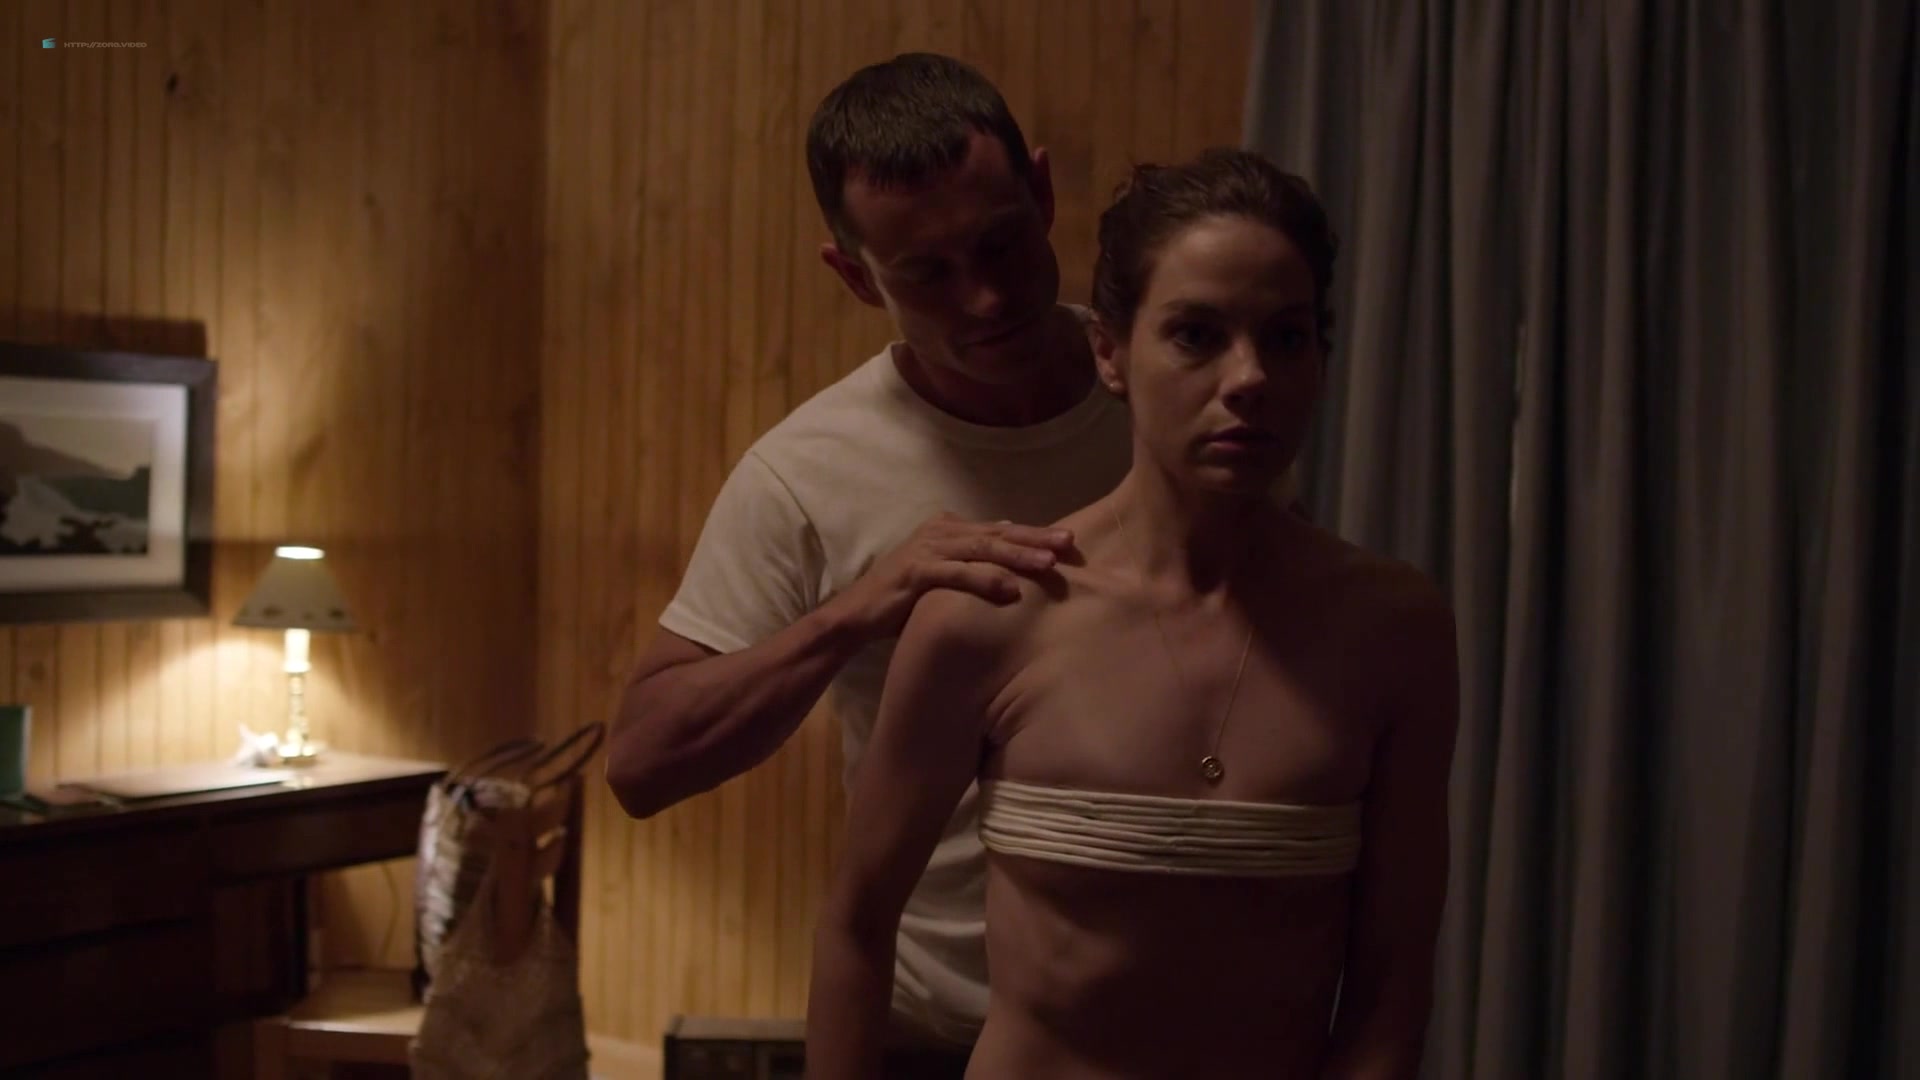 Michelle monaghan topless